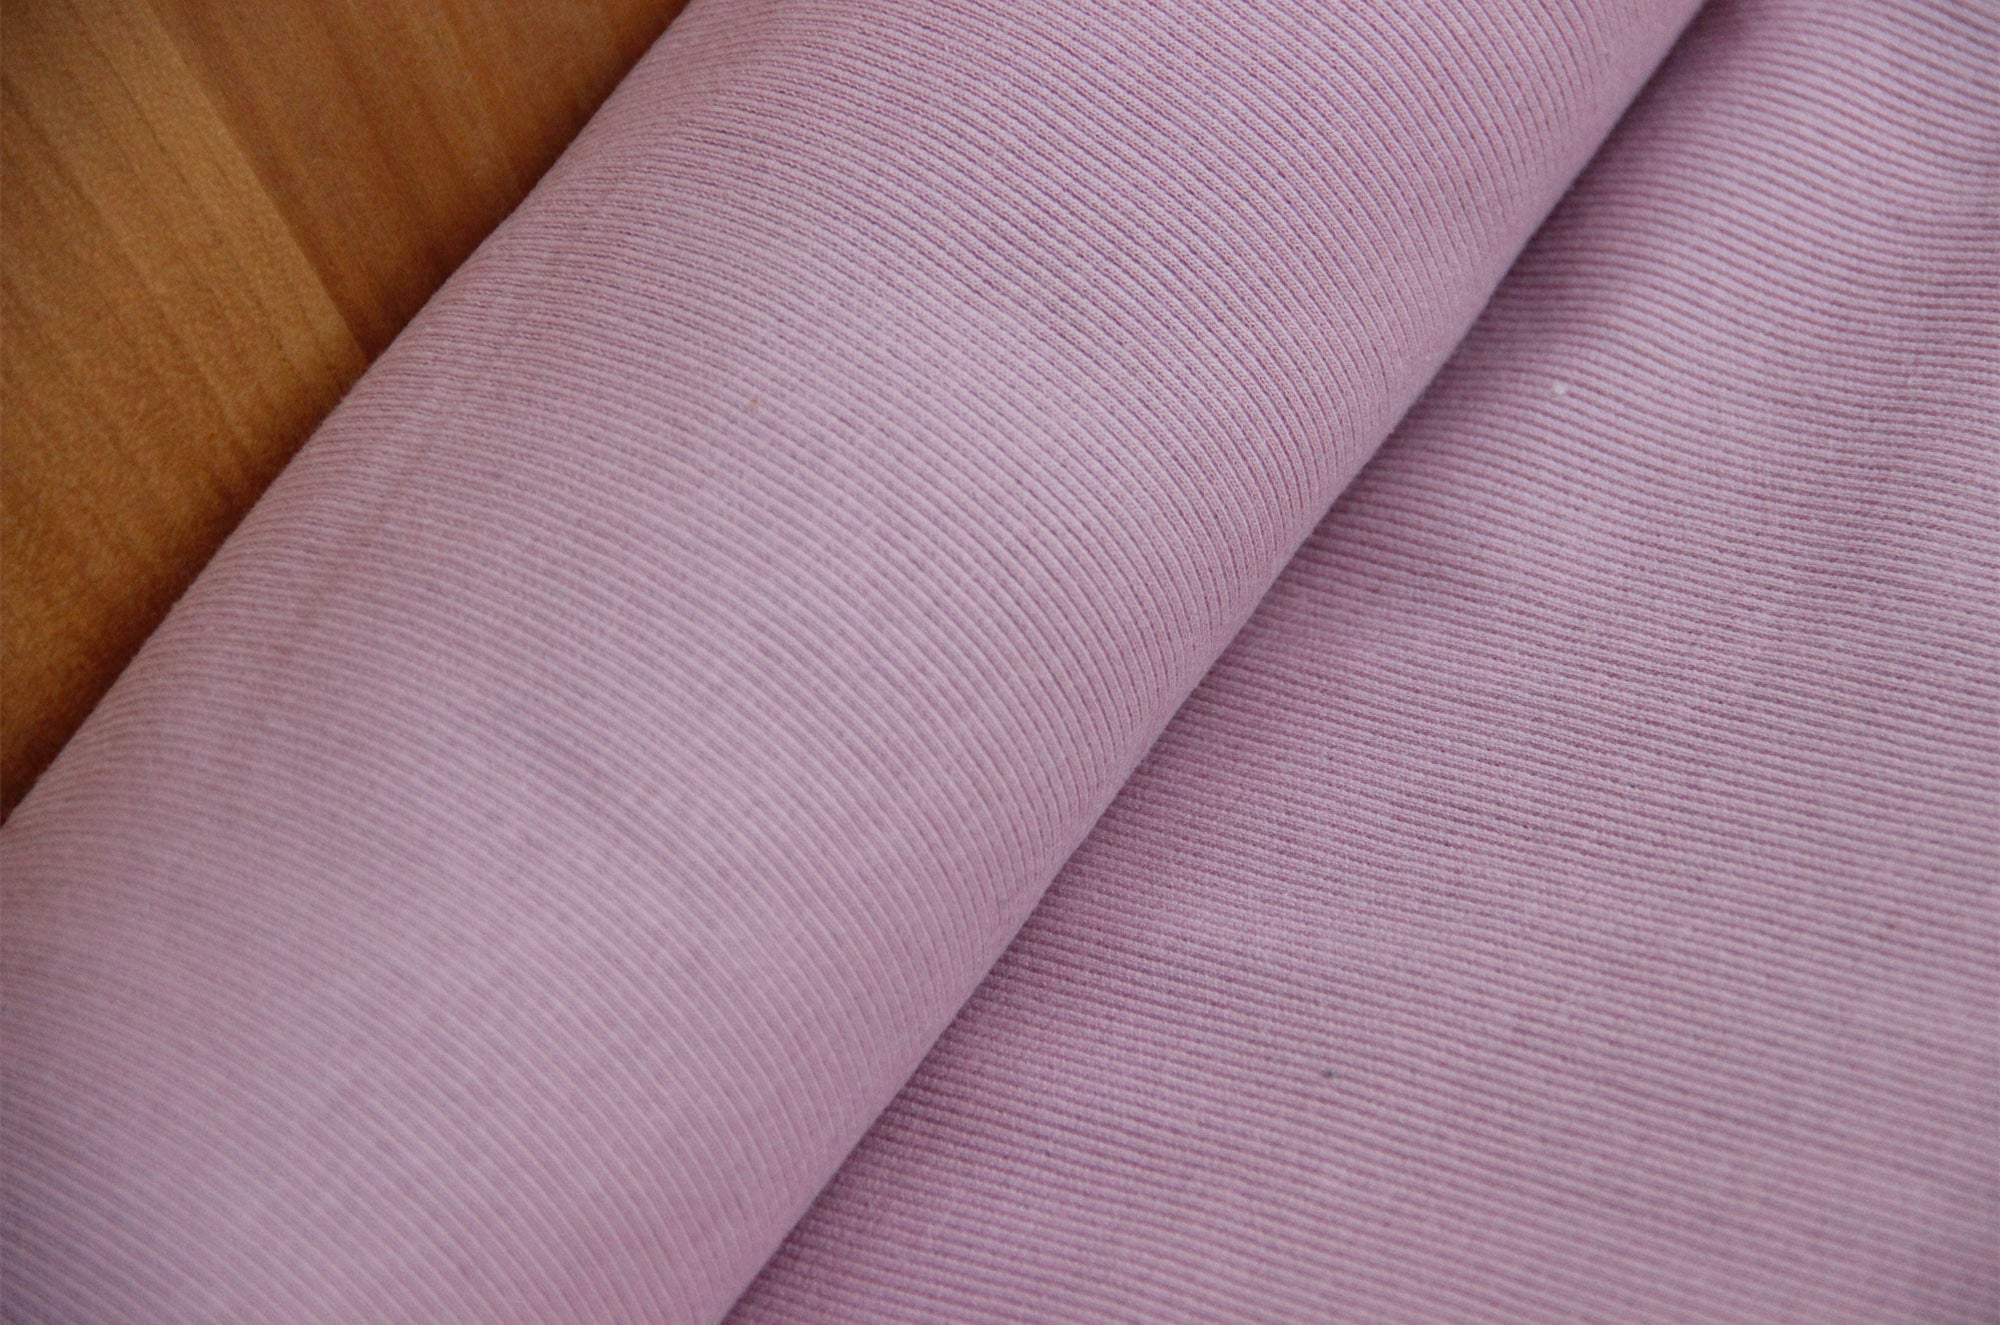 Cuffs ribbed in tube *From 25 cm